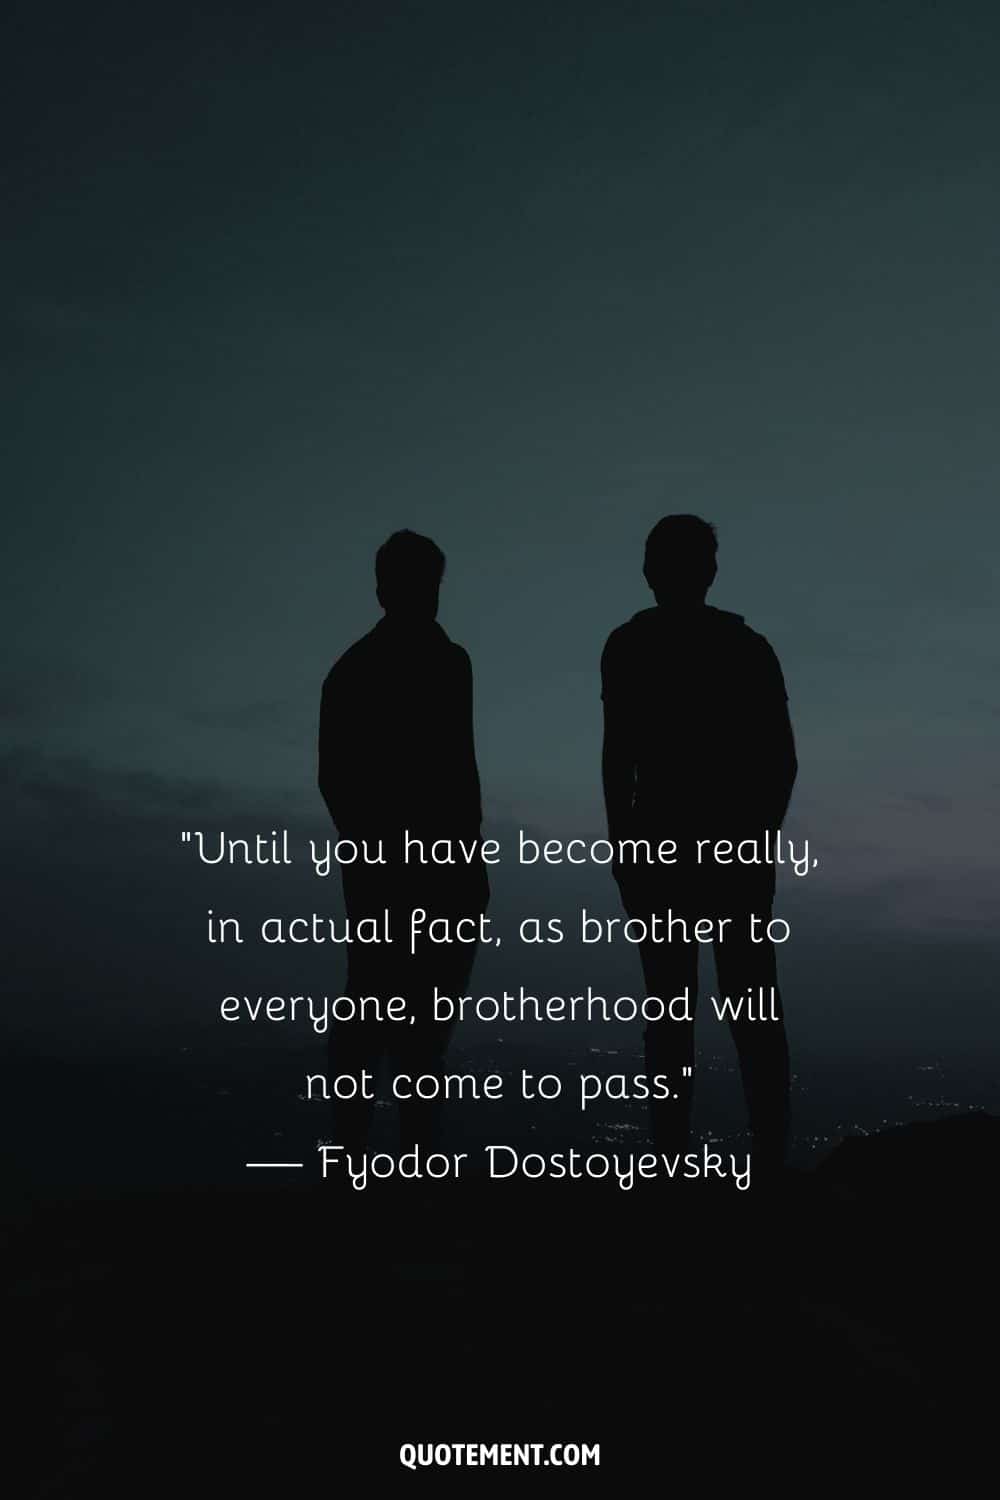 “Until you have become really, in actual fact, as brother to everyone, brotherhood will not come to pass.” — Fyodor Dostoyevsky